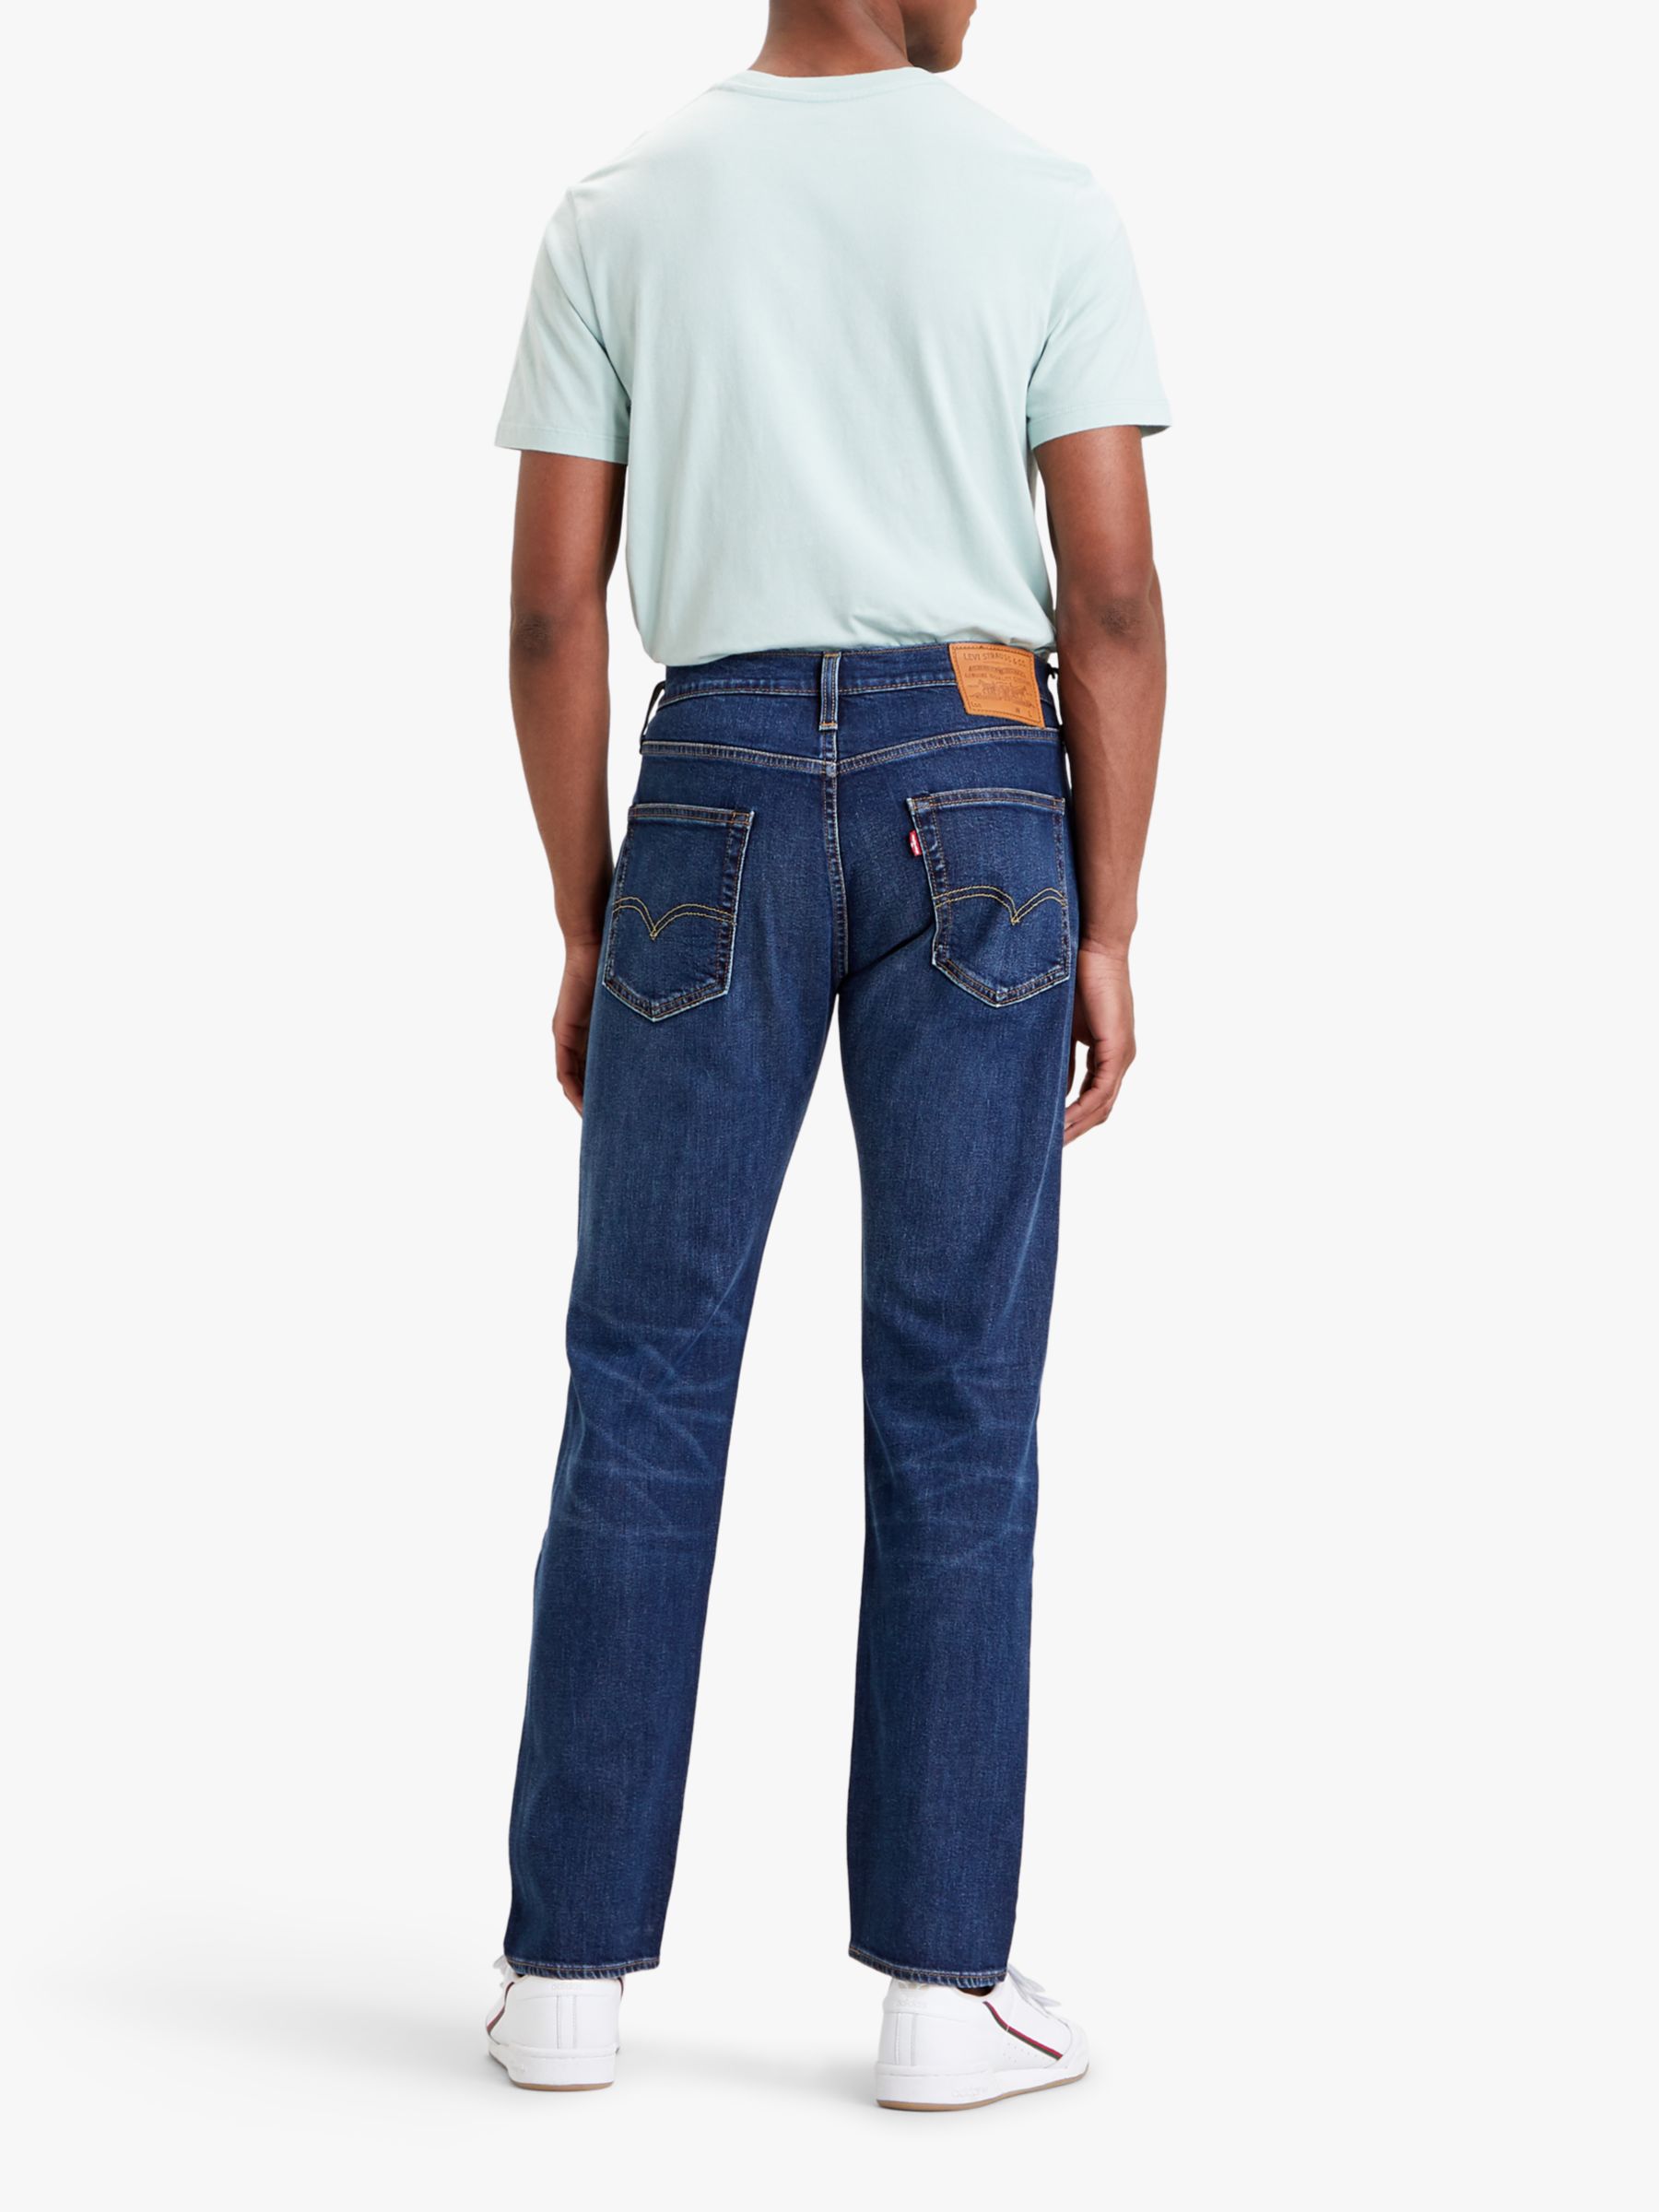 Levi's 502 Tapered Fit Jeans, The Thrill Adv at John Lewis & Partners